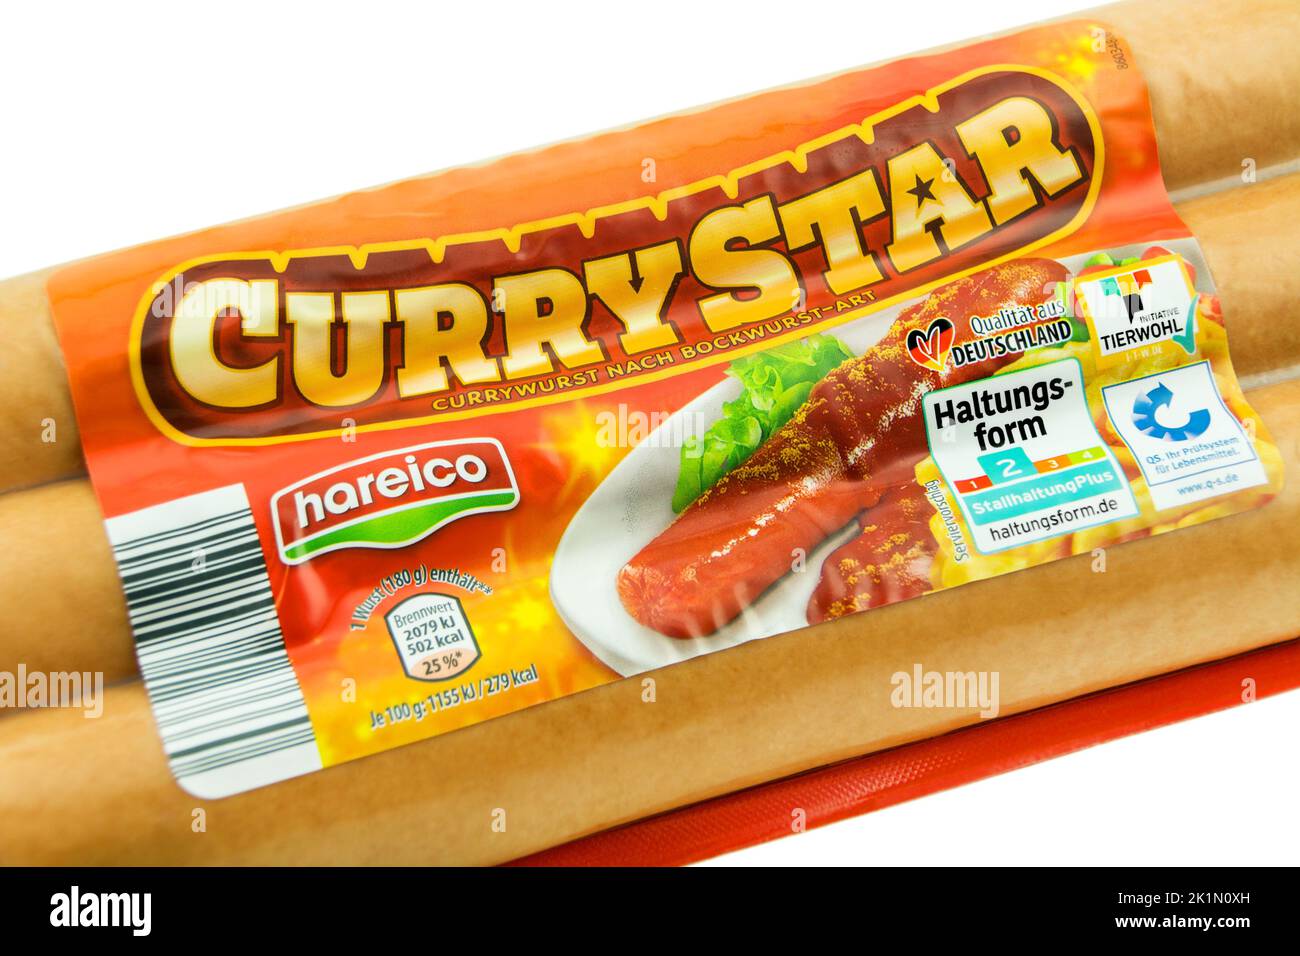 Hareico Currywurst Currystar mit Tierwohl Label Banque D'Images